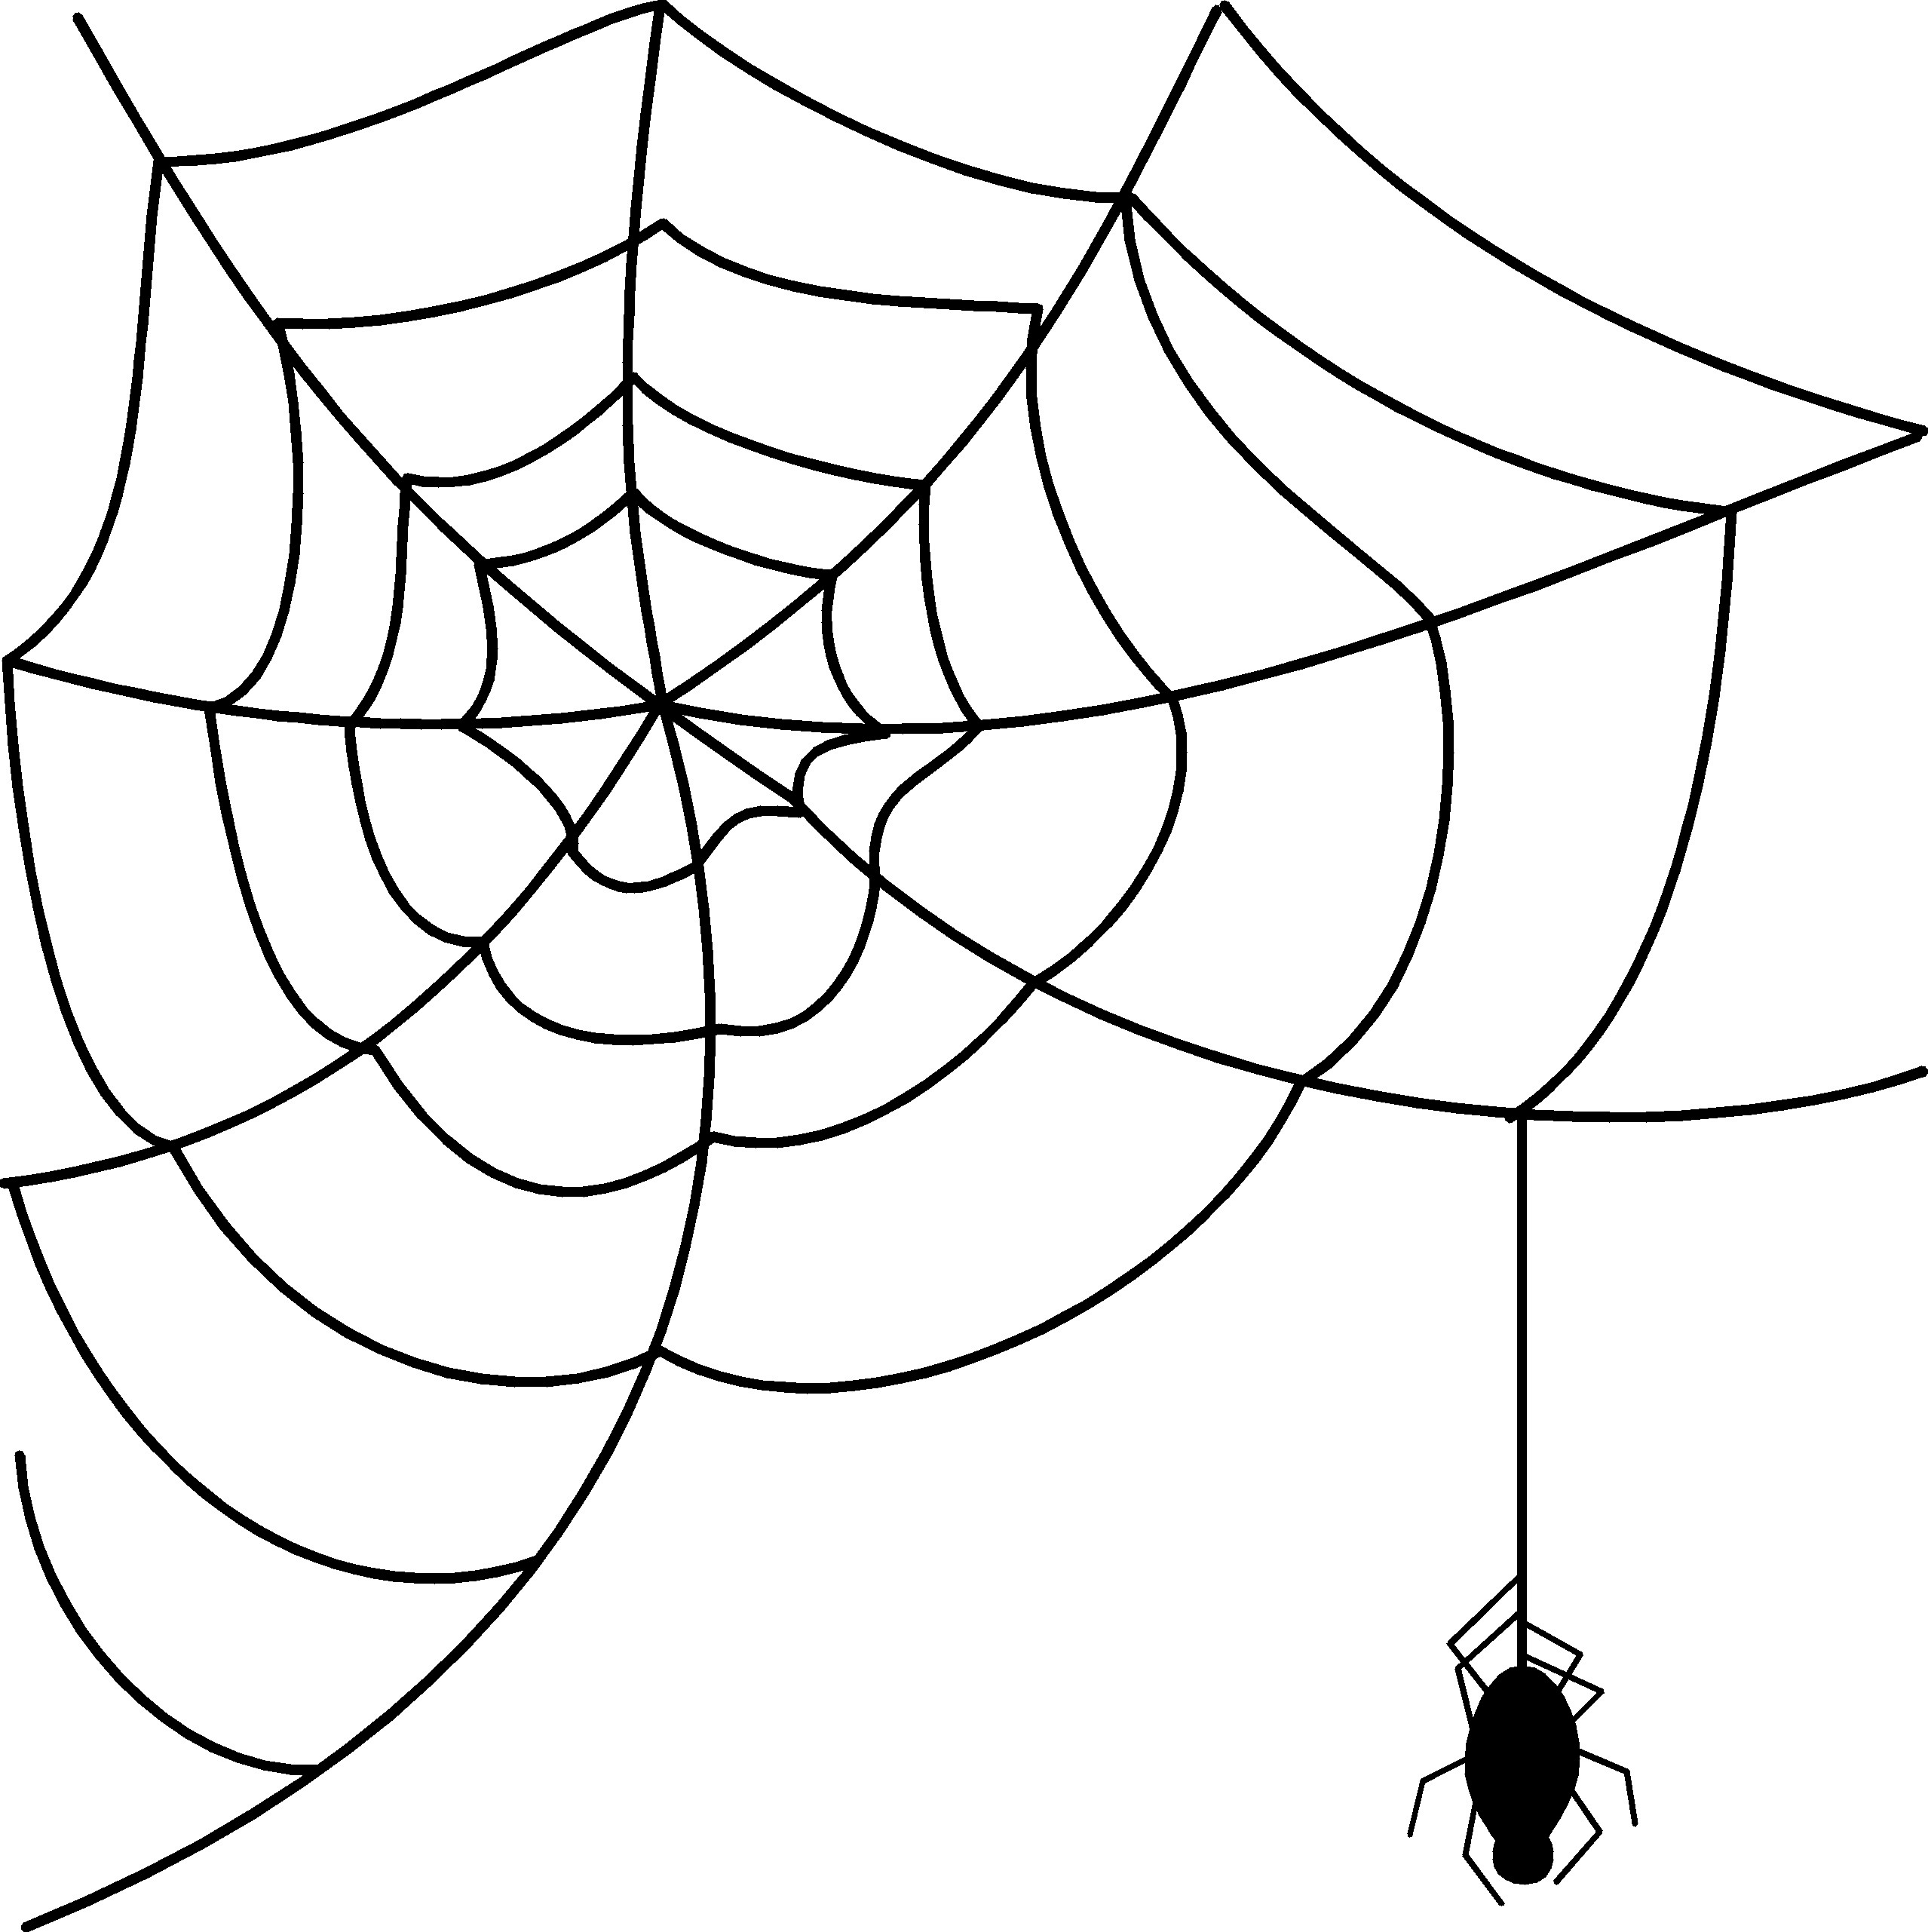 Free clipart spiders and webs - ClipartFox